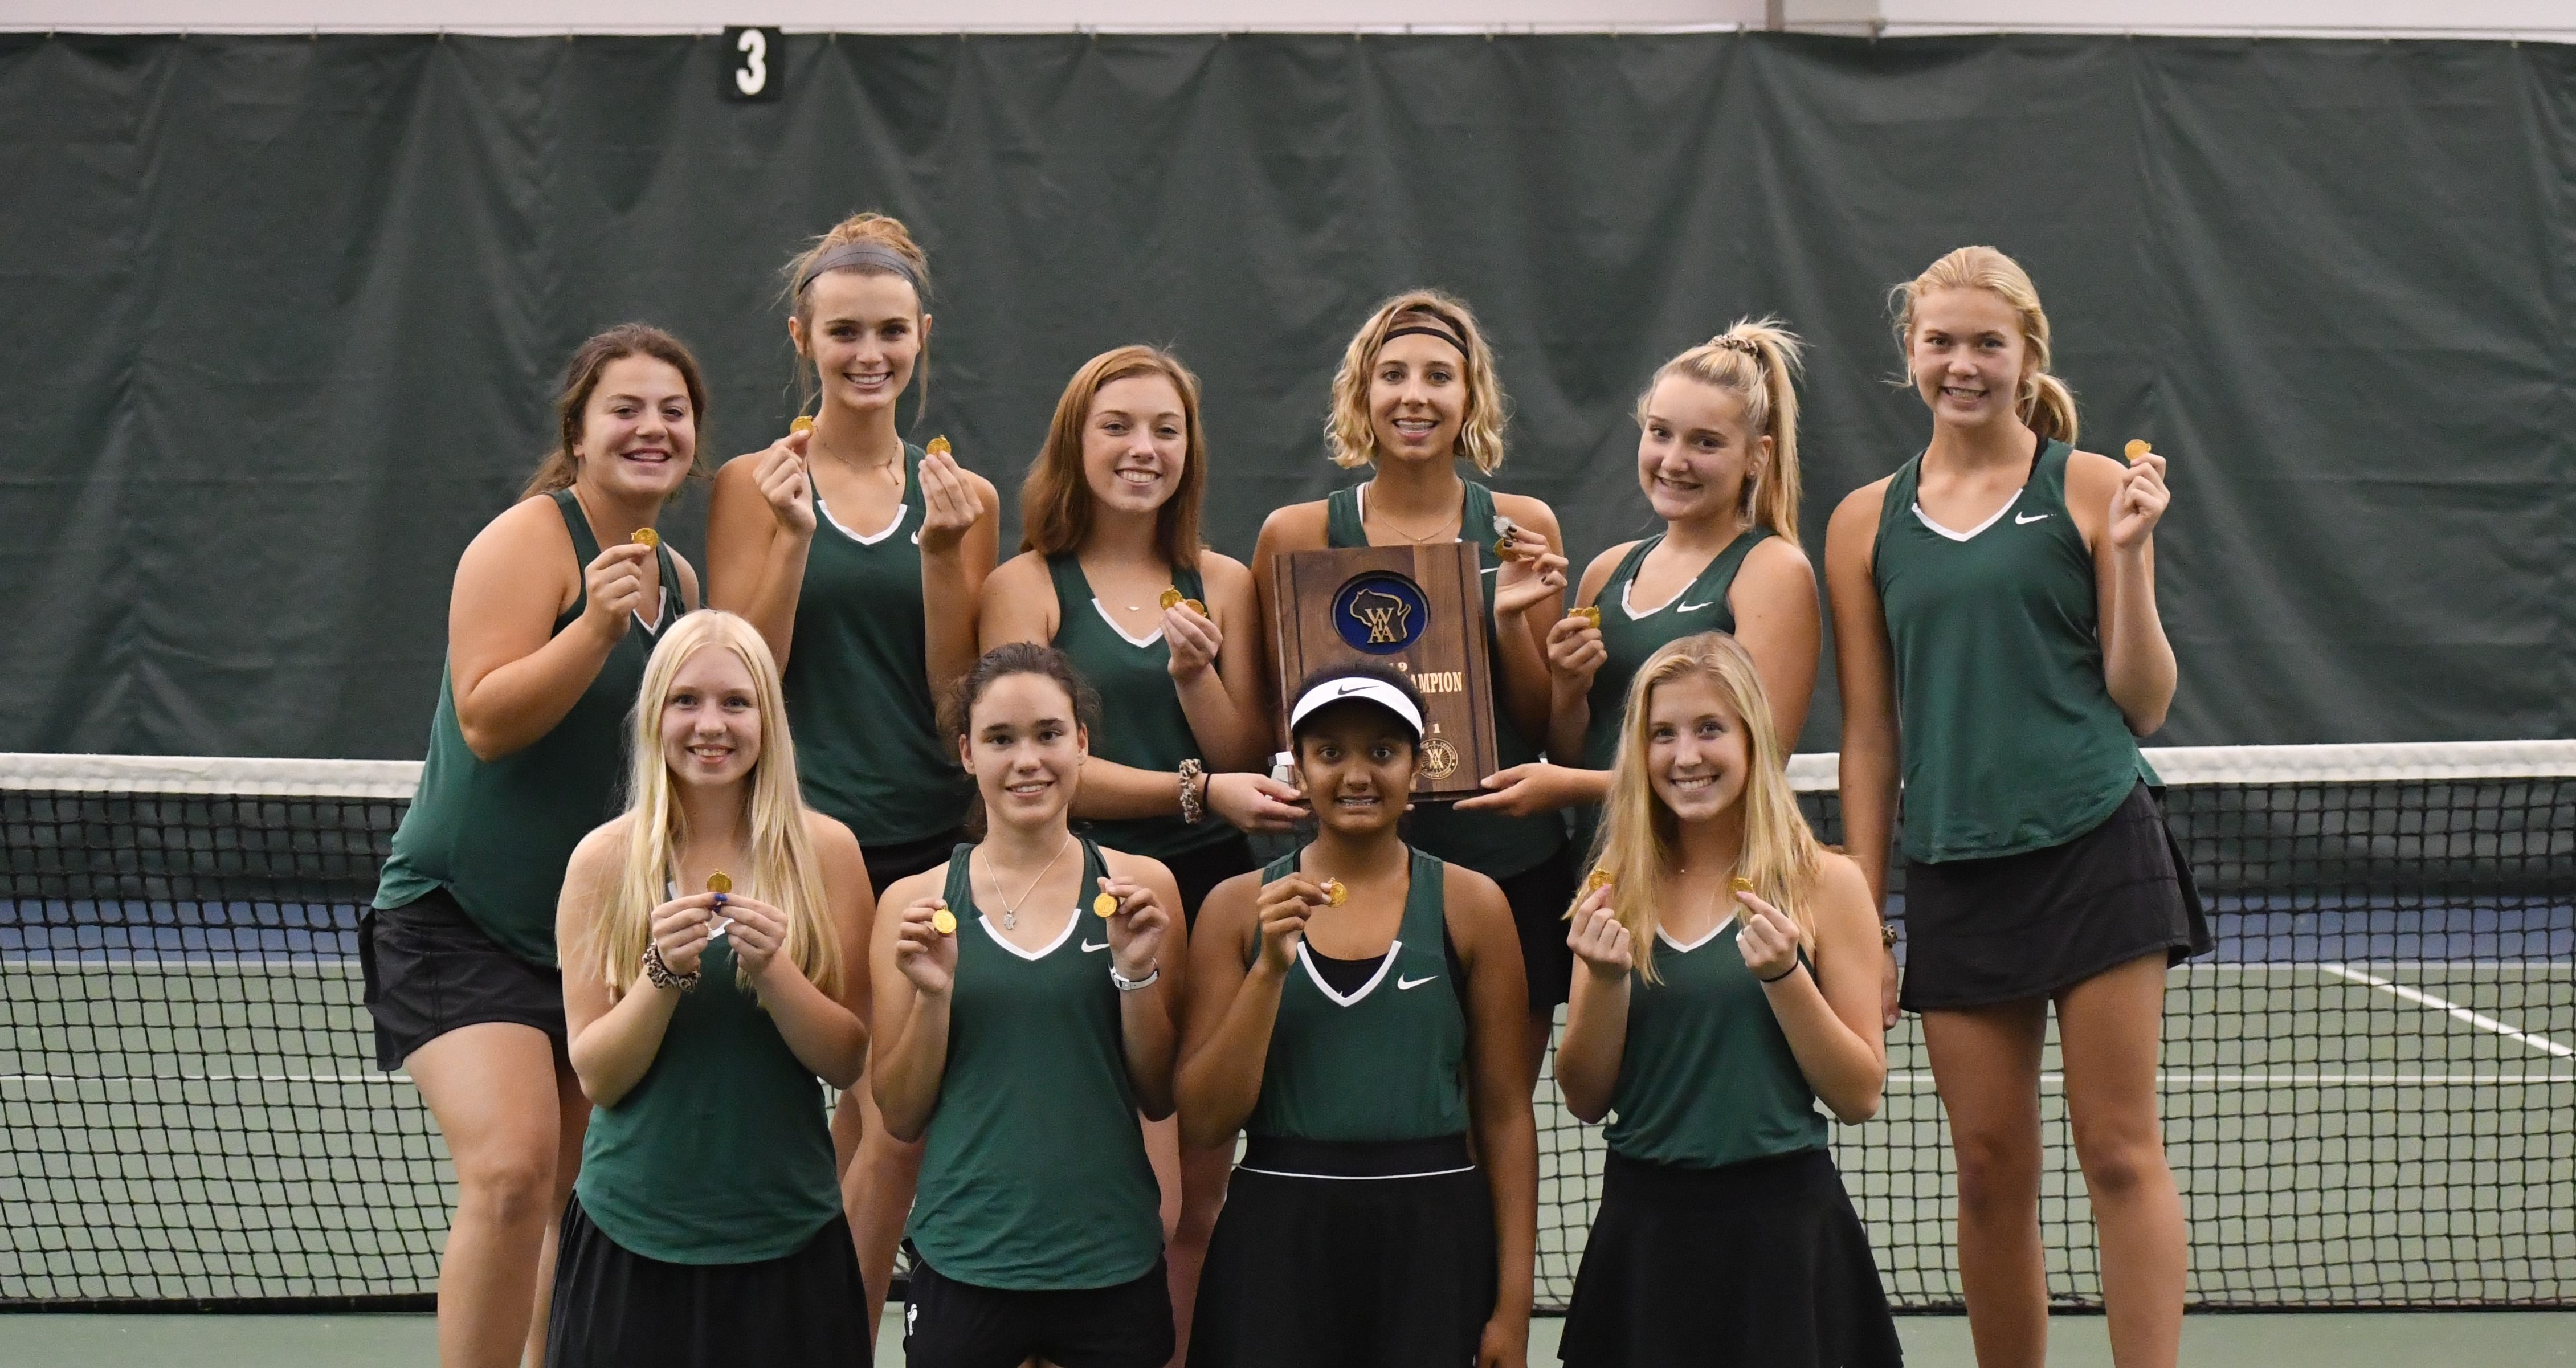 Jaguars punch their ticket to team state in tennis